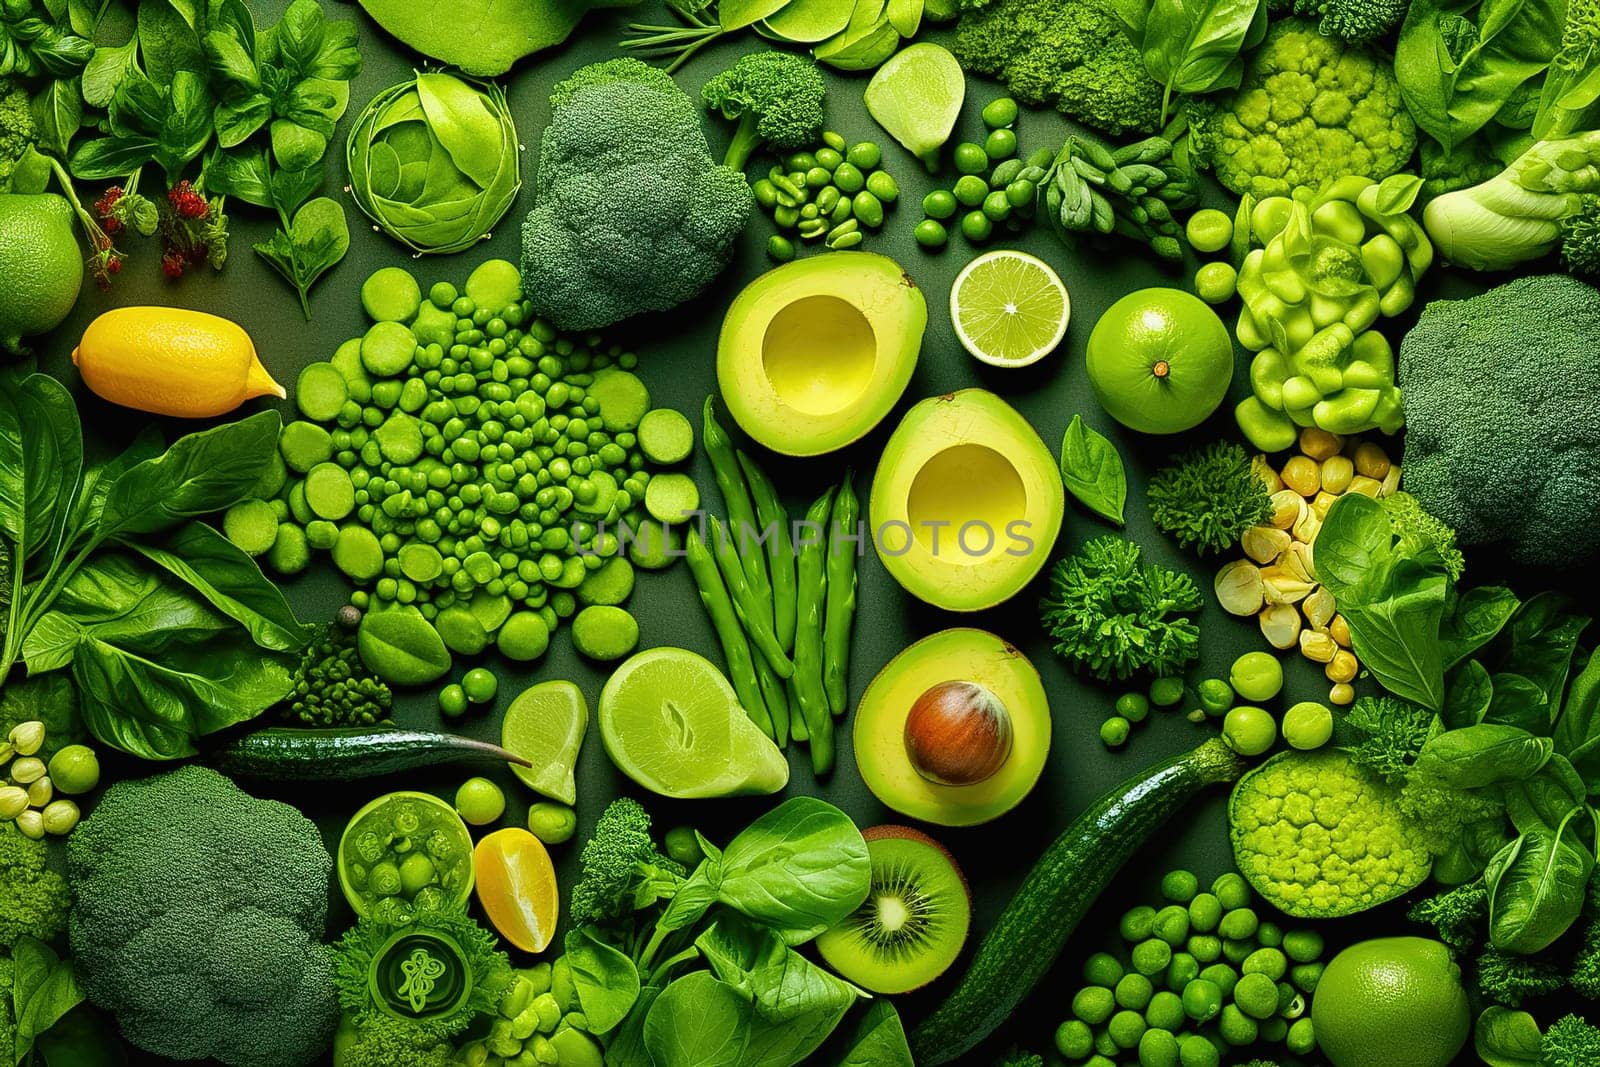 Assorted green vegetables and fruits. View from above. by Yurich32